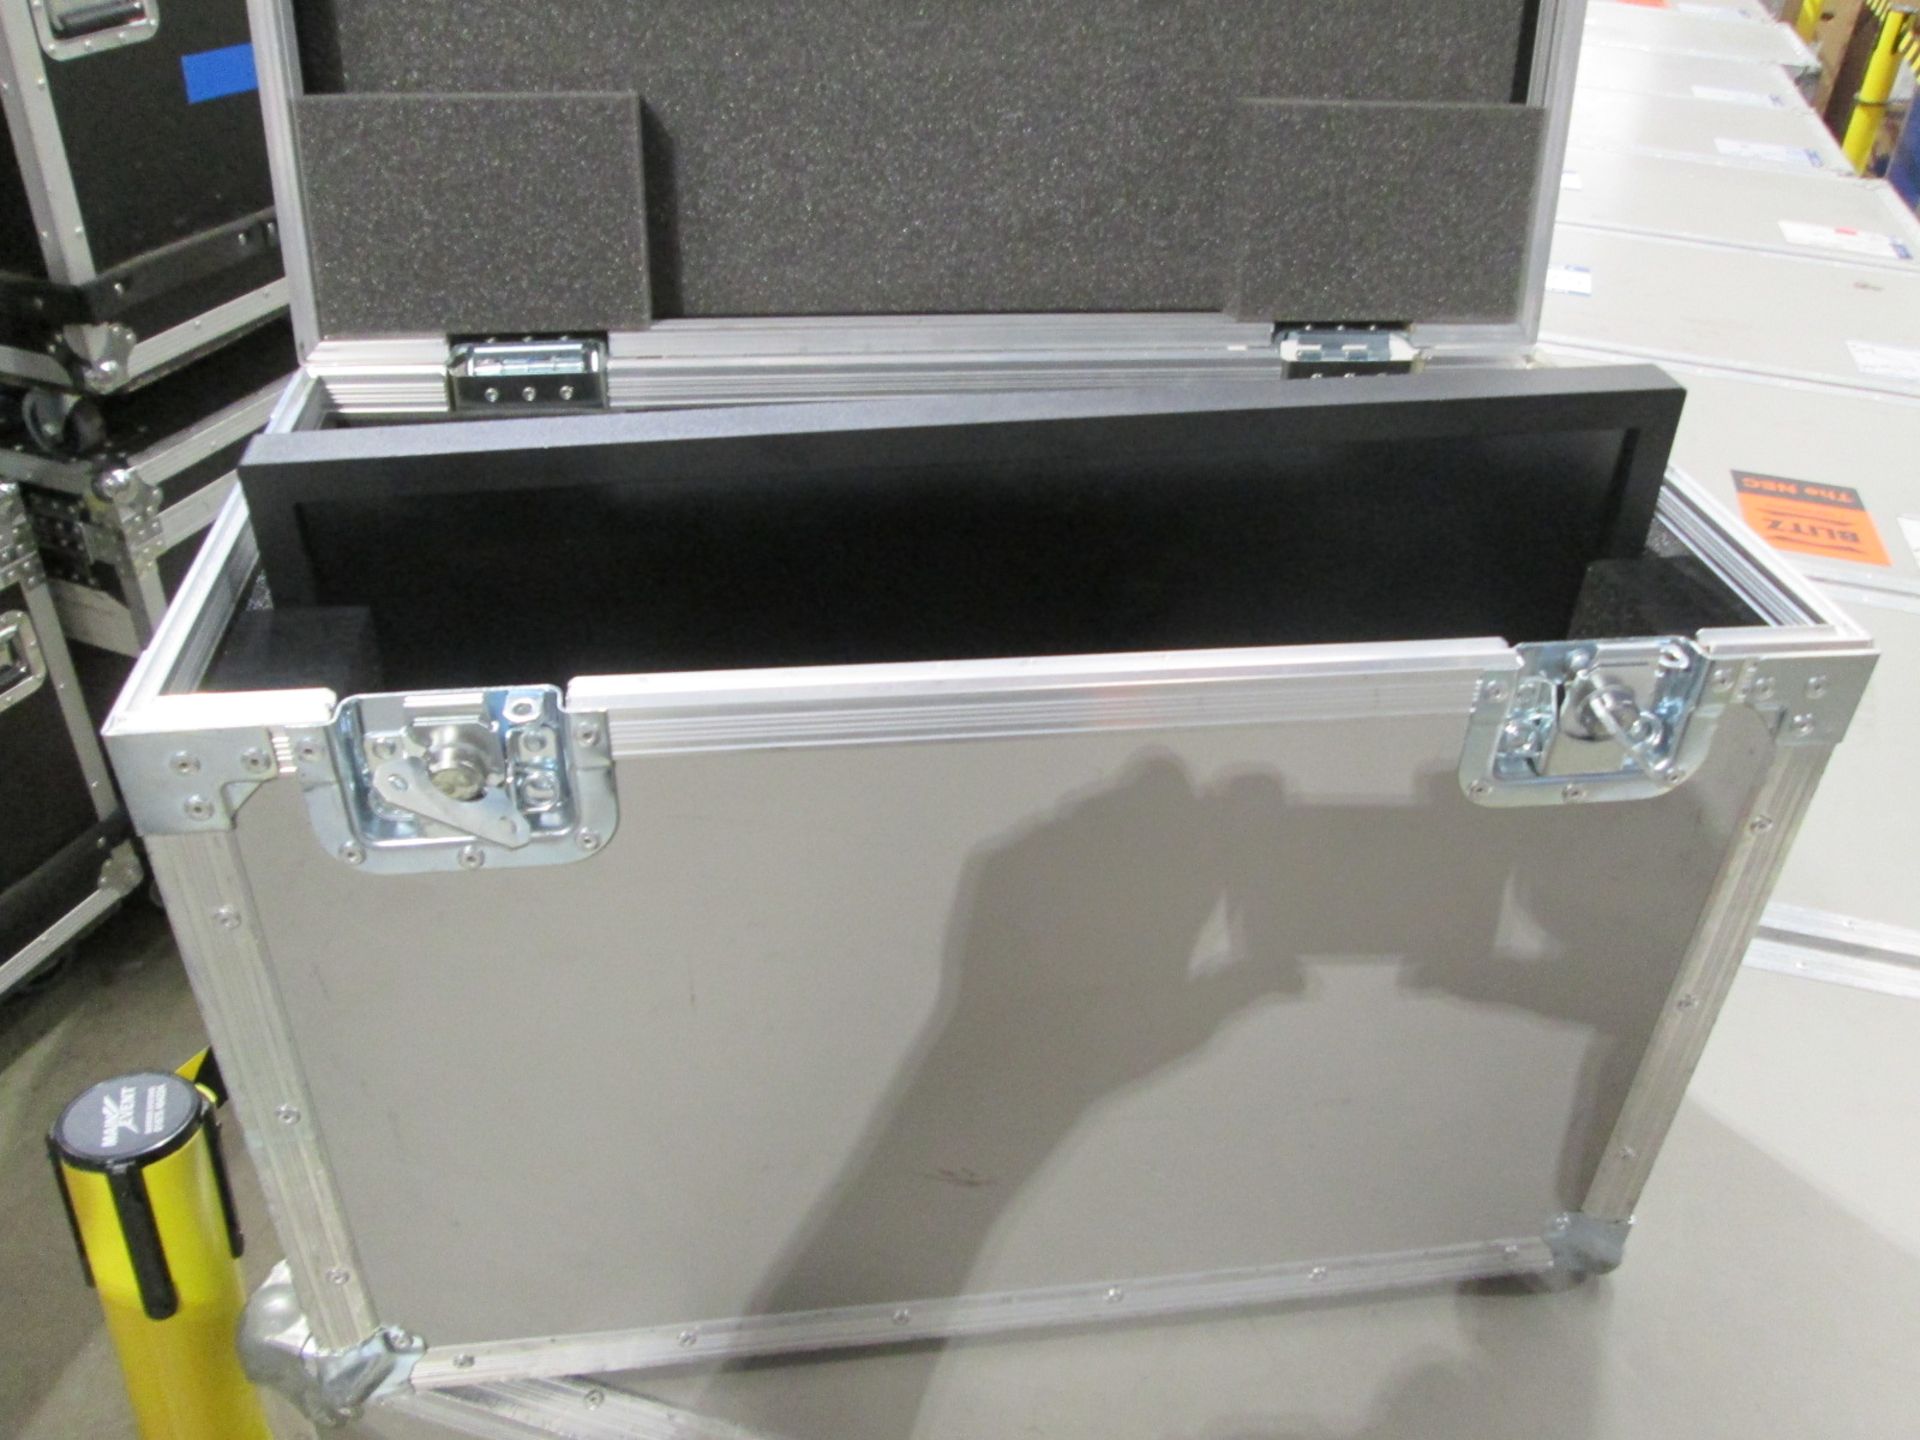 NEC PA243W 24" LCD Monitors (Qty 3) In flight cases - Image 5 of 5